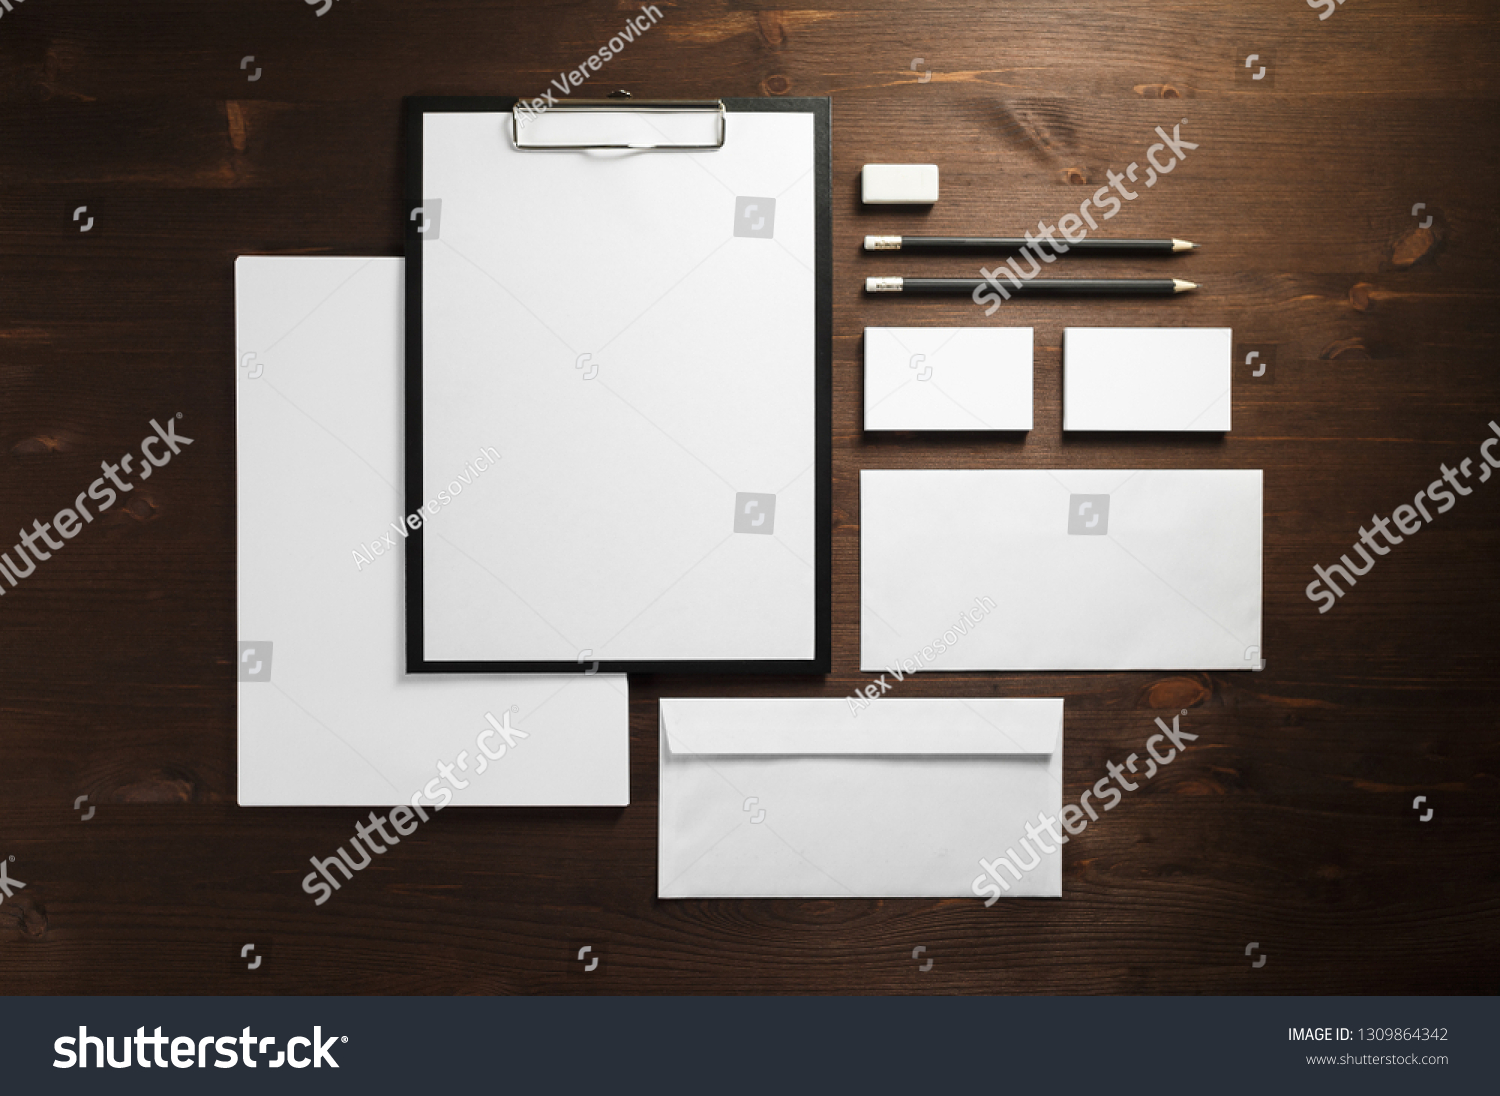 Corporate identity template. Blank stationery mock up on wooden background. Flat lay. #1309864342